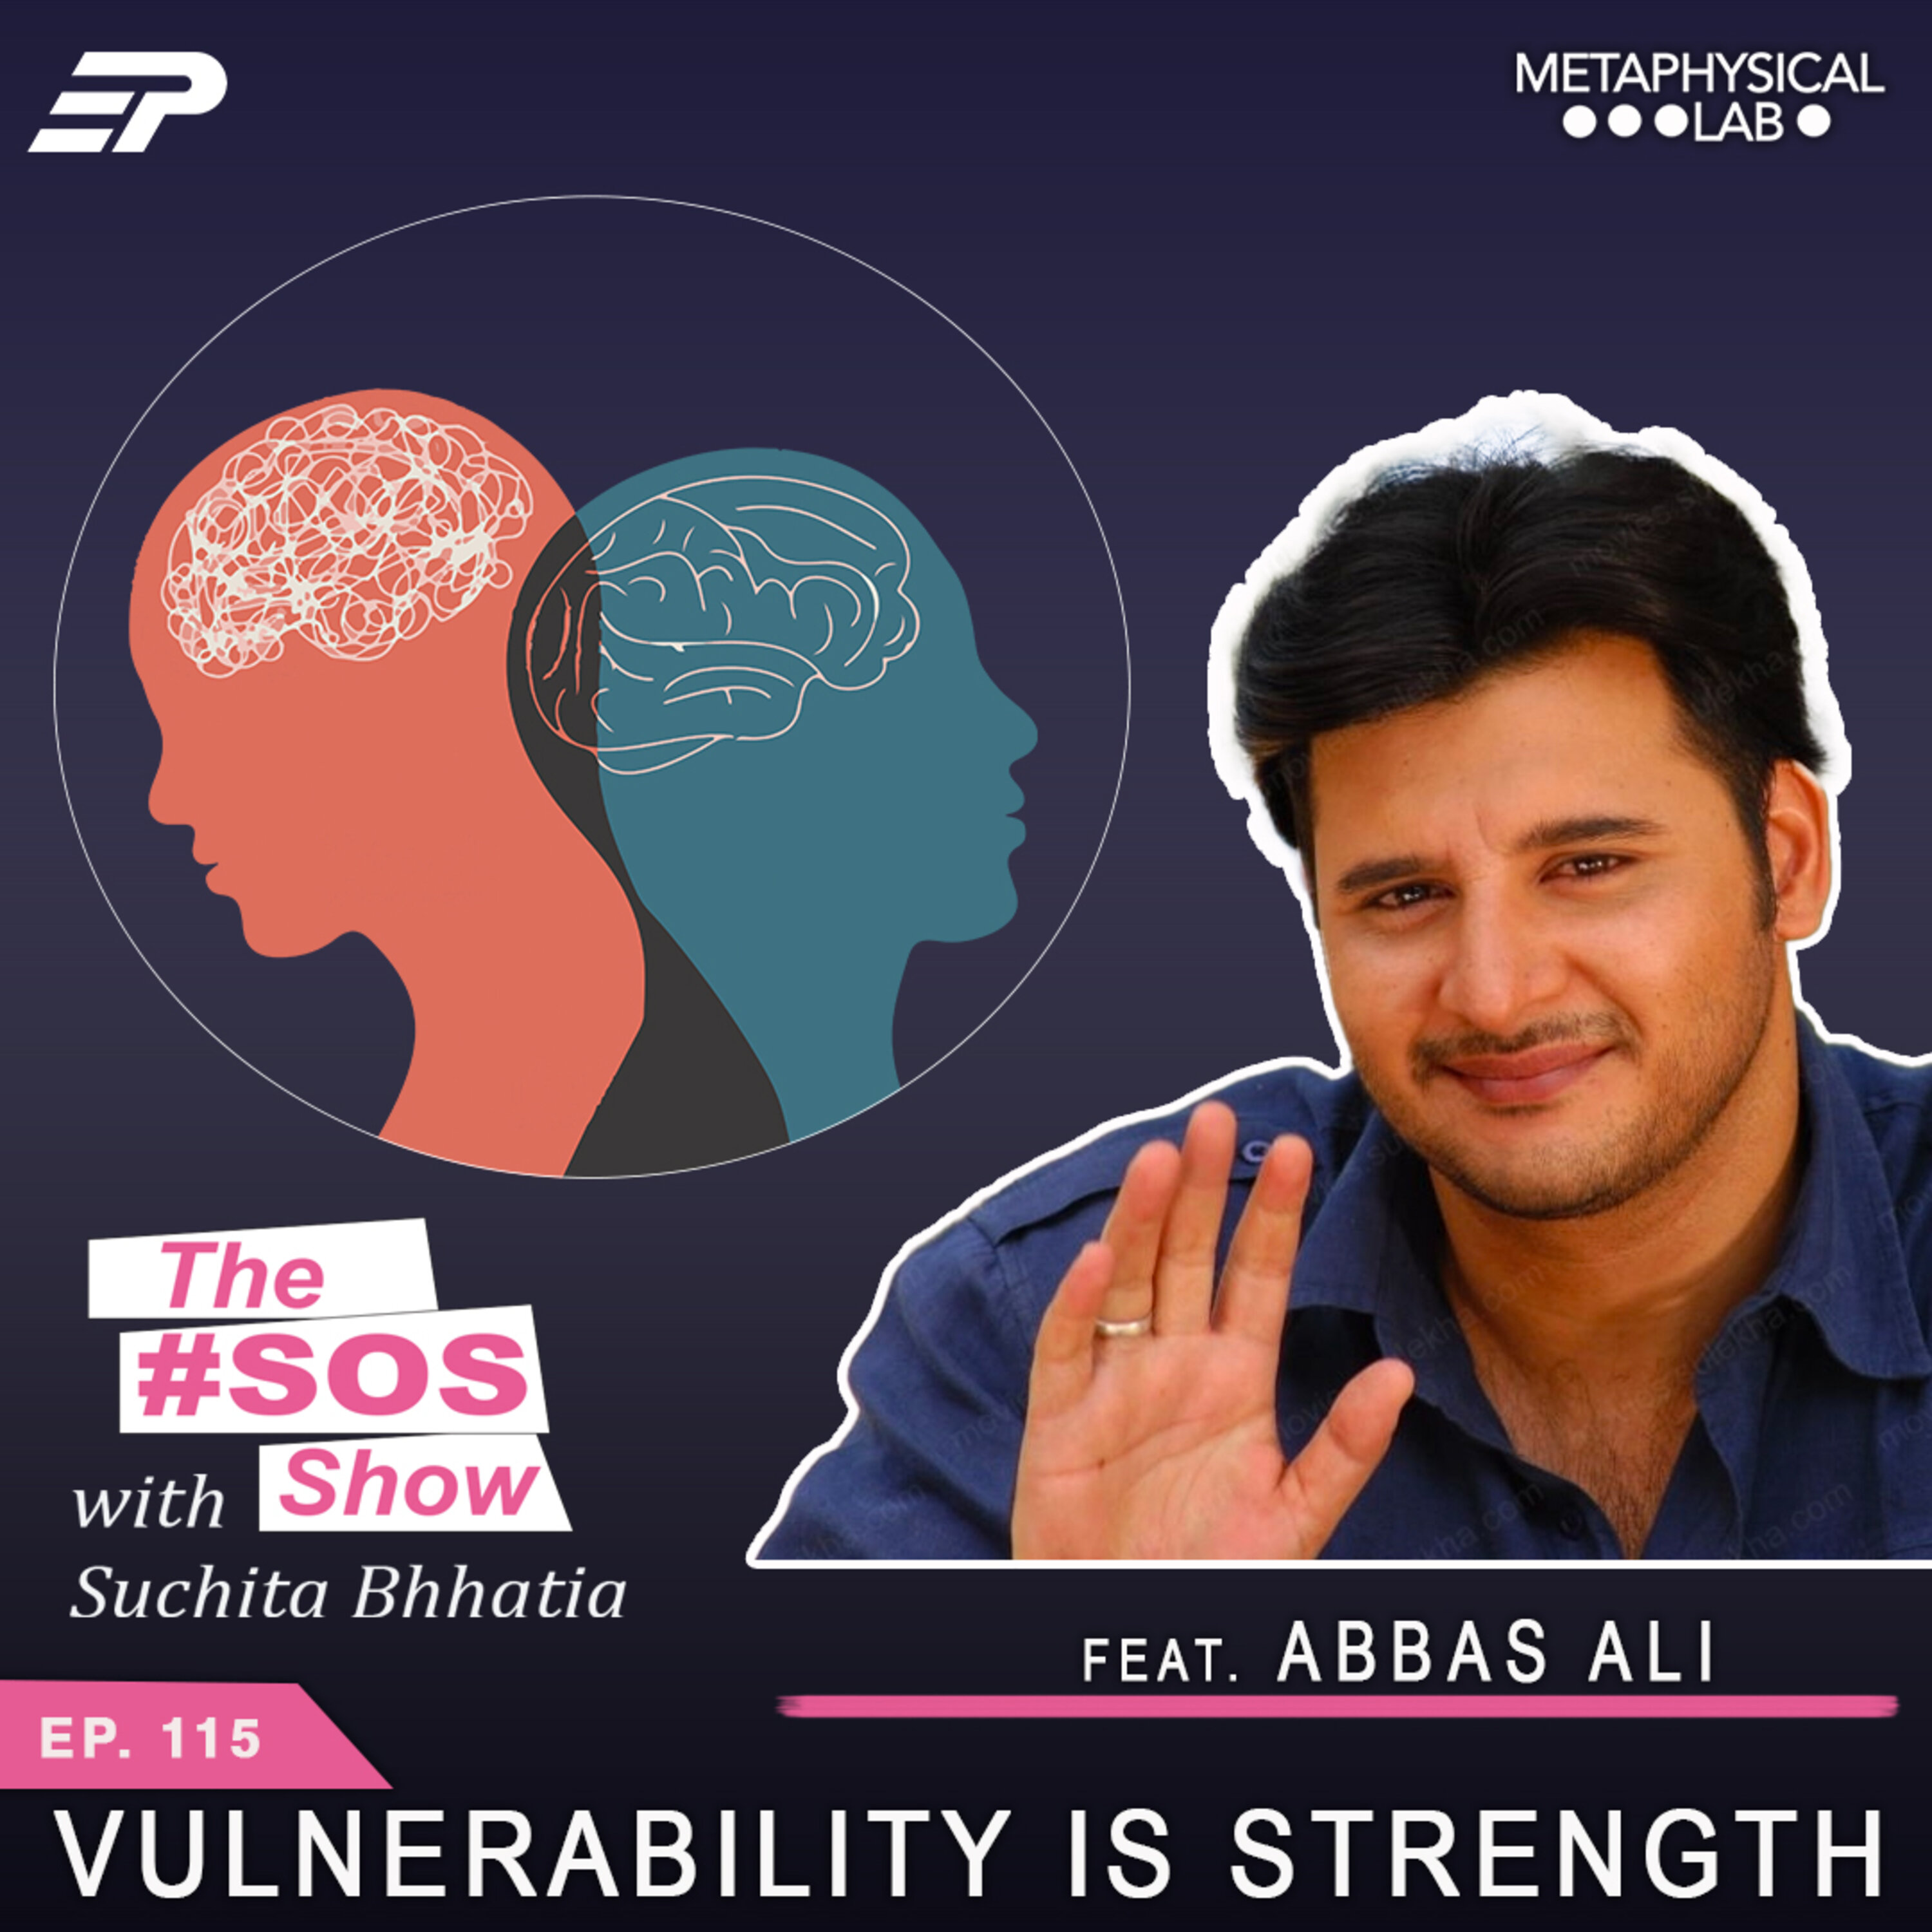 Ep.115 VULNERABILITY IS STRENGTH FT: ABBAS ALI